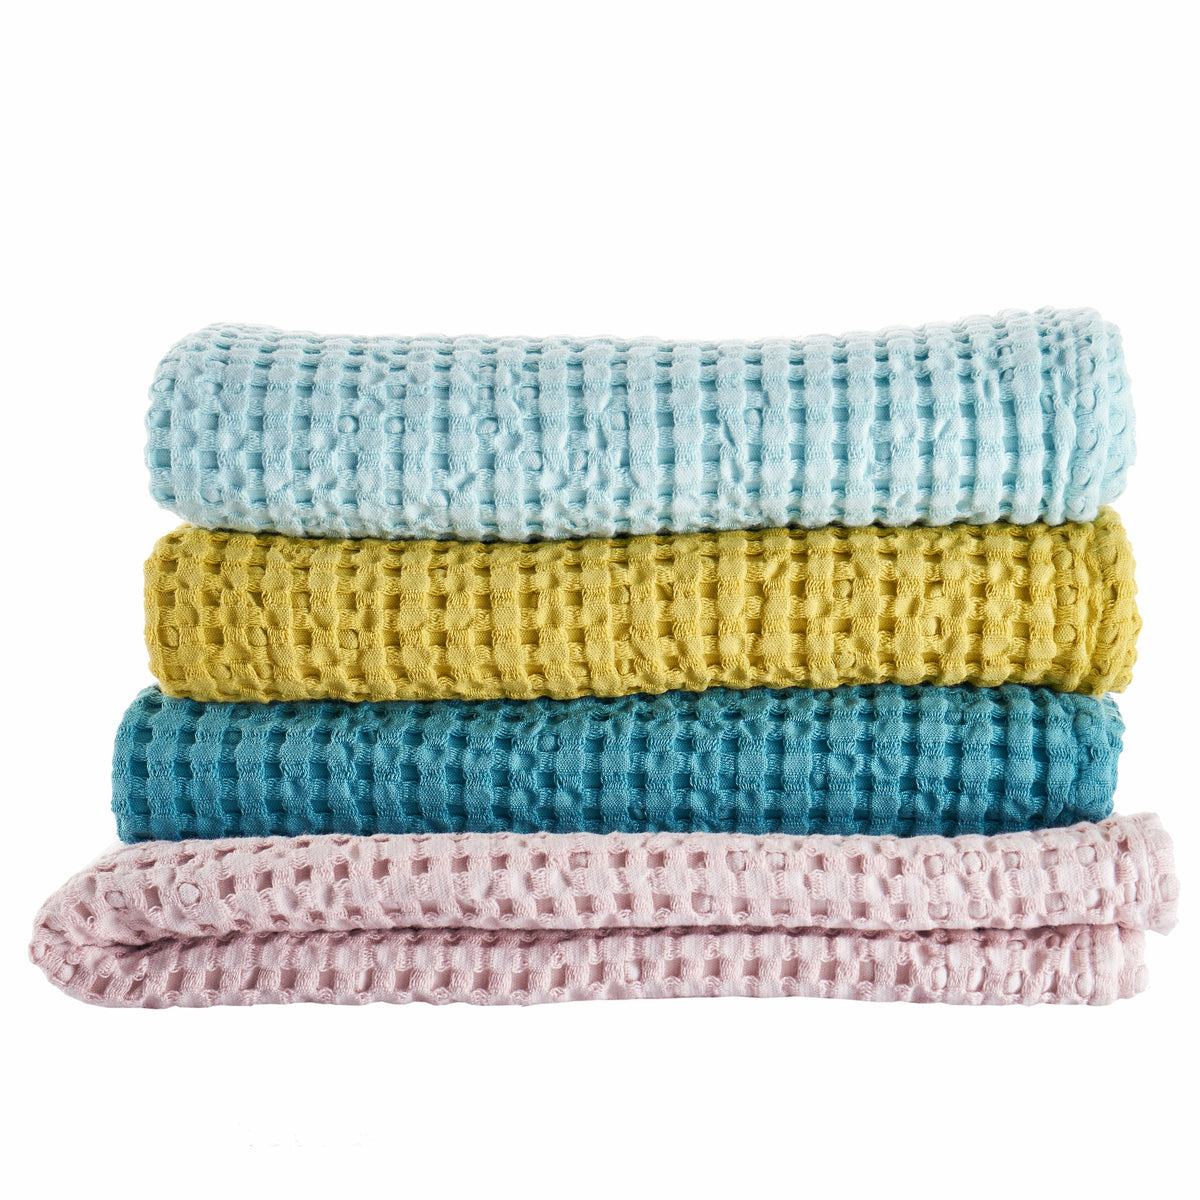 Abyss Pousada Bath Towels Stack Folded Fine Linens